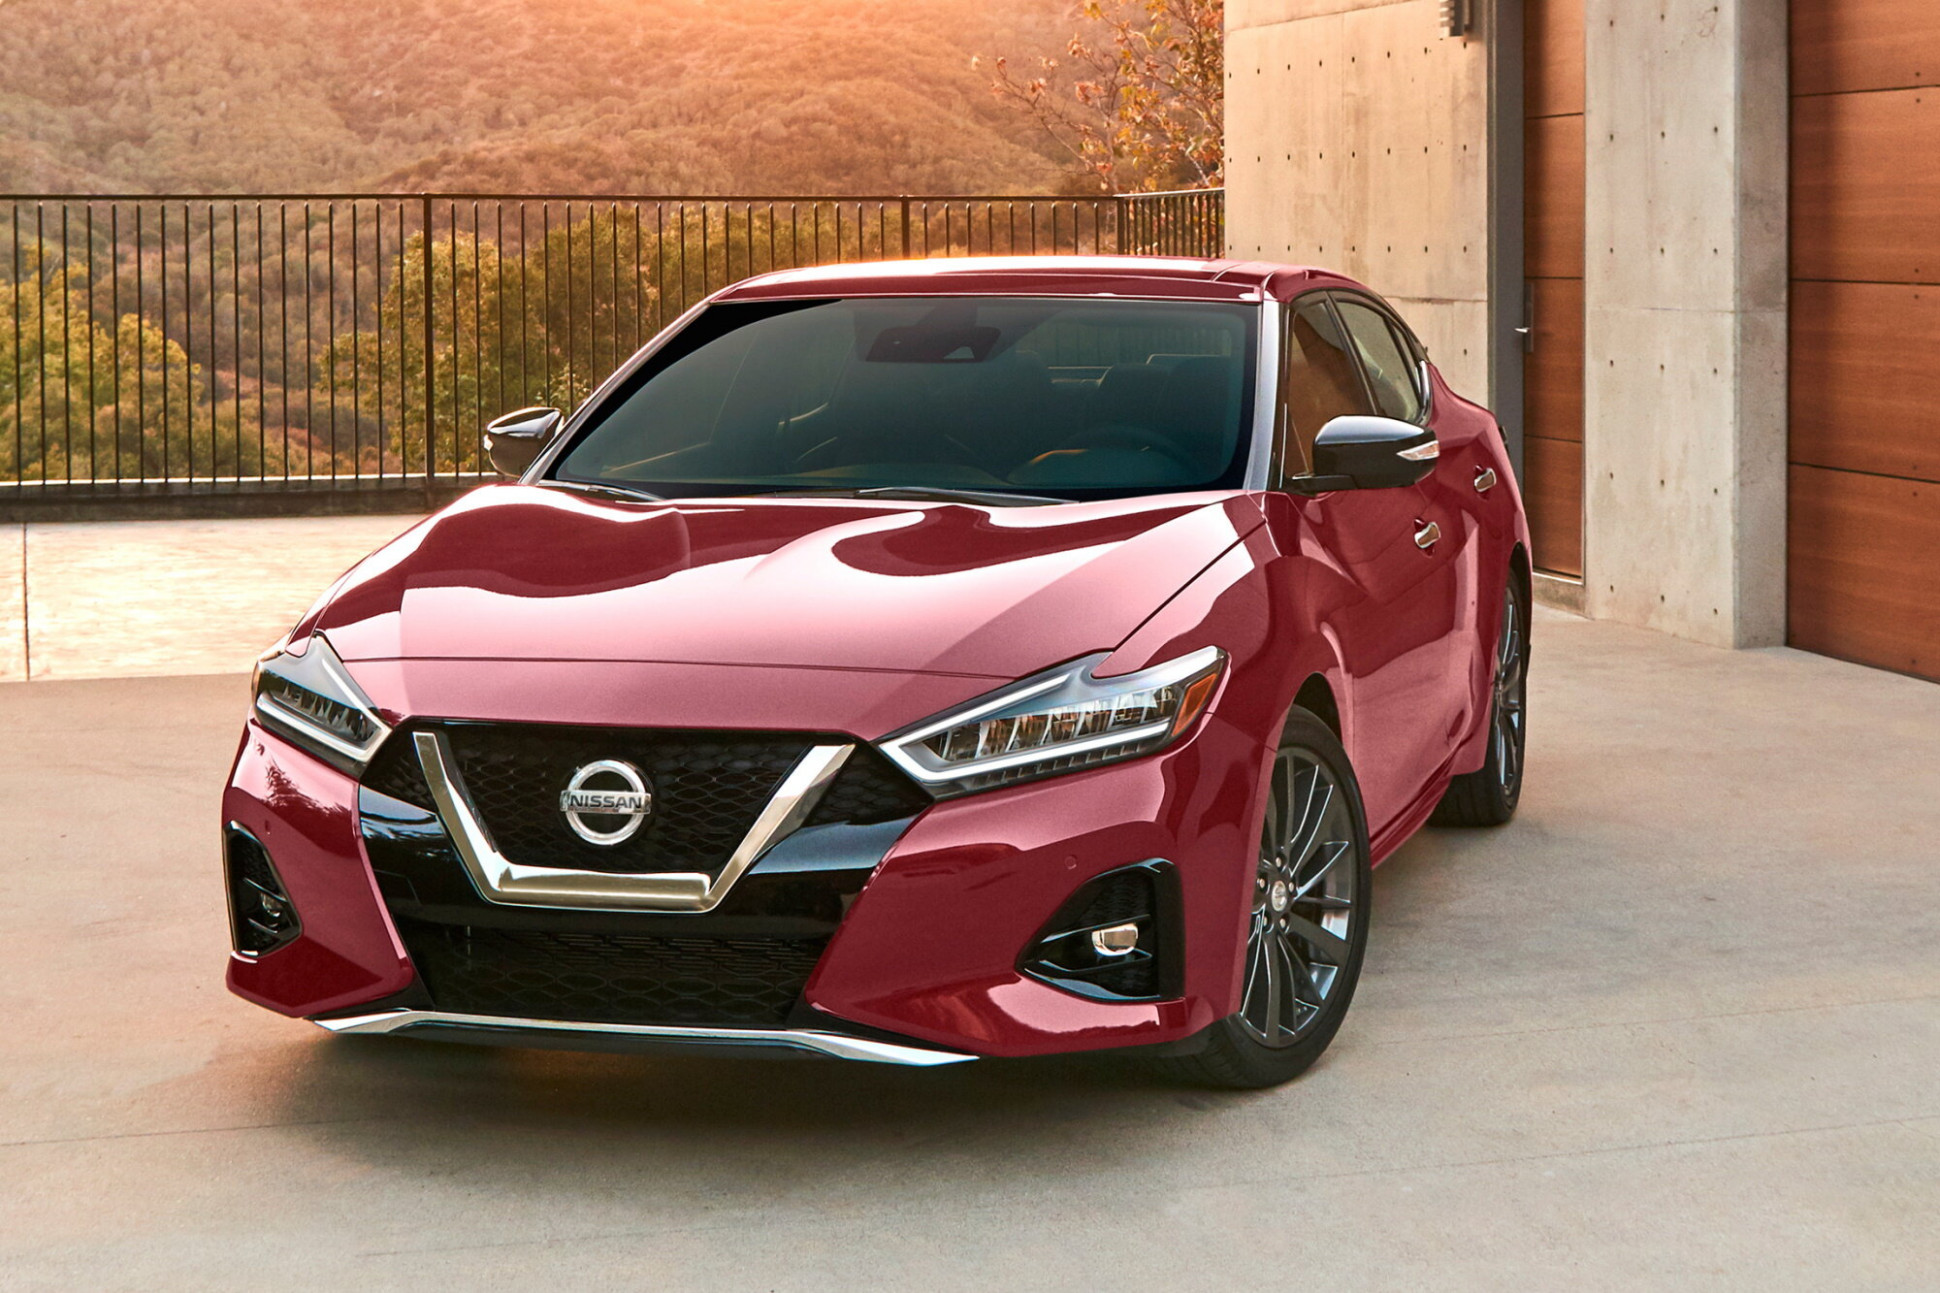 Price, Design and Review When Will The 2022 Nissan Maxima Come Out